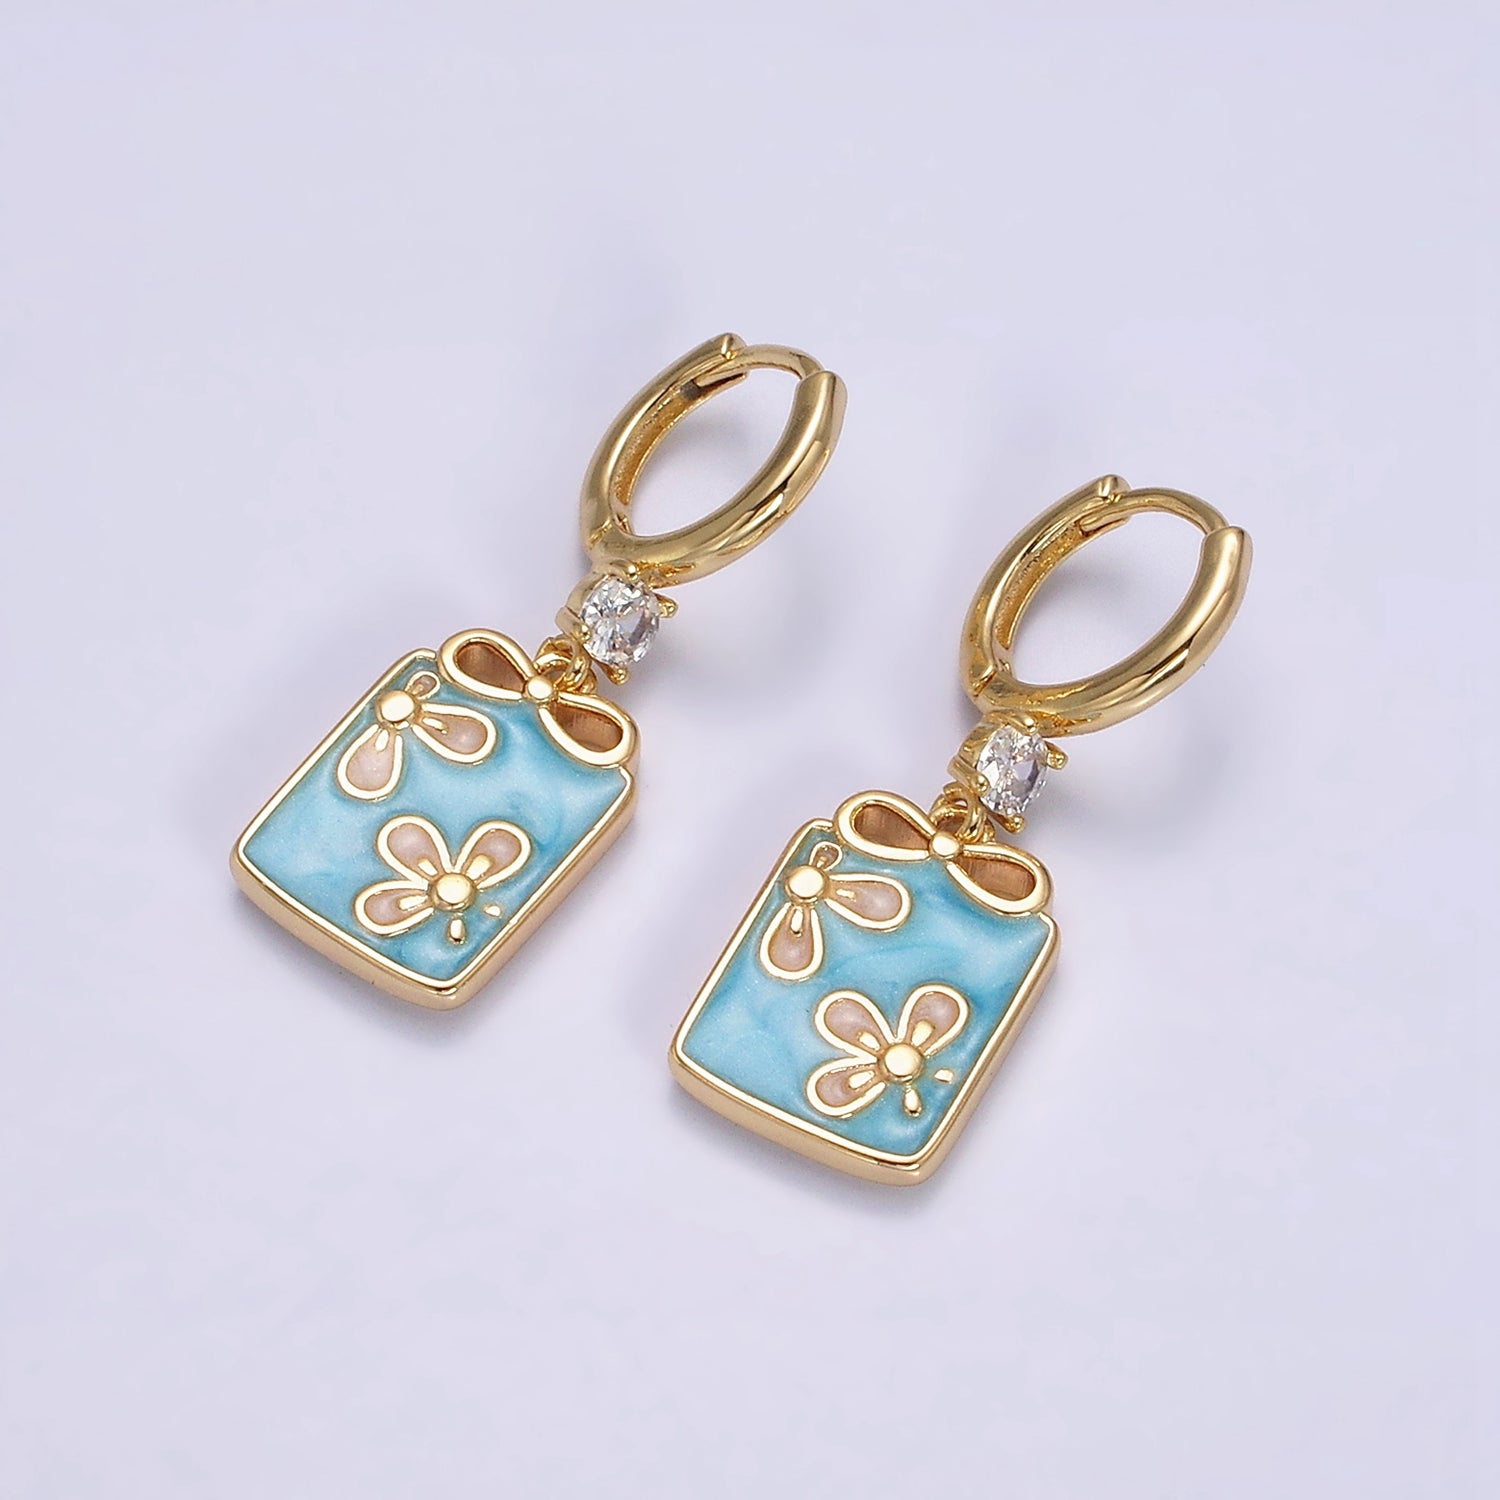 16K Gold Filled Pink, White, Blue Sparkly Enamel Ribbon Bow Rectangular CZ Drop Huggie Earrings | Y855 - Y857 - DLUXCA